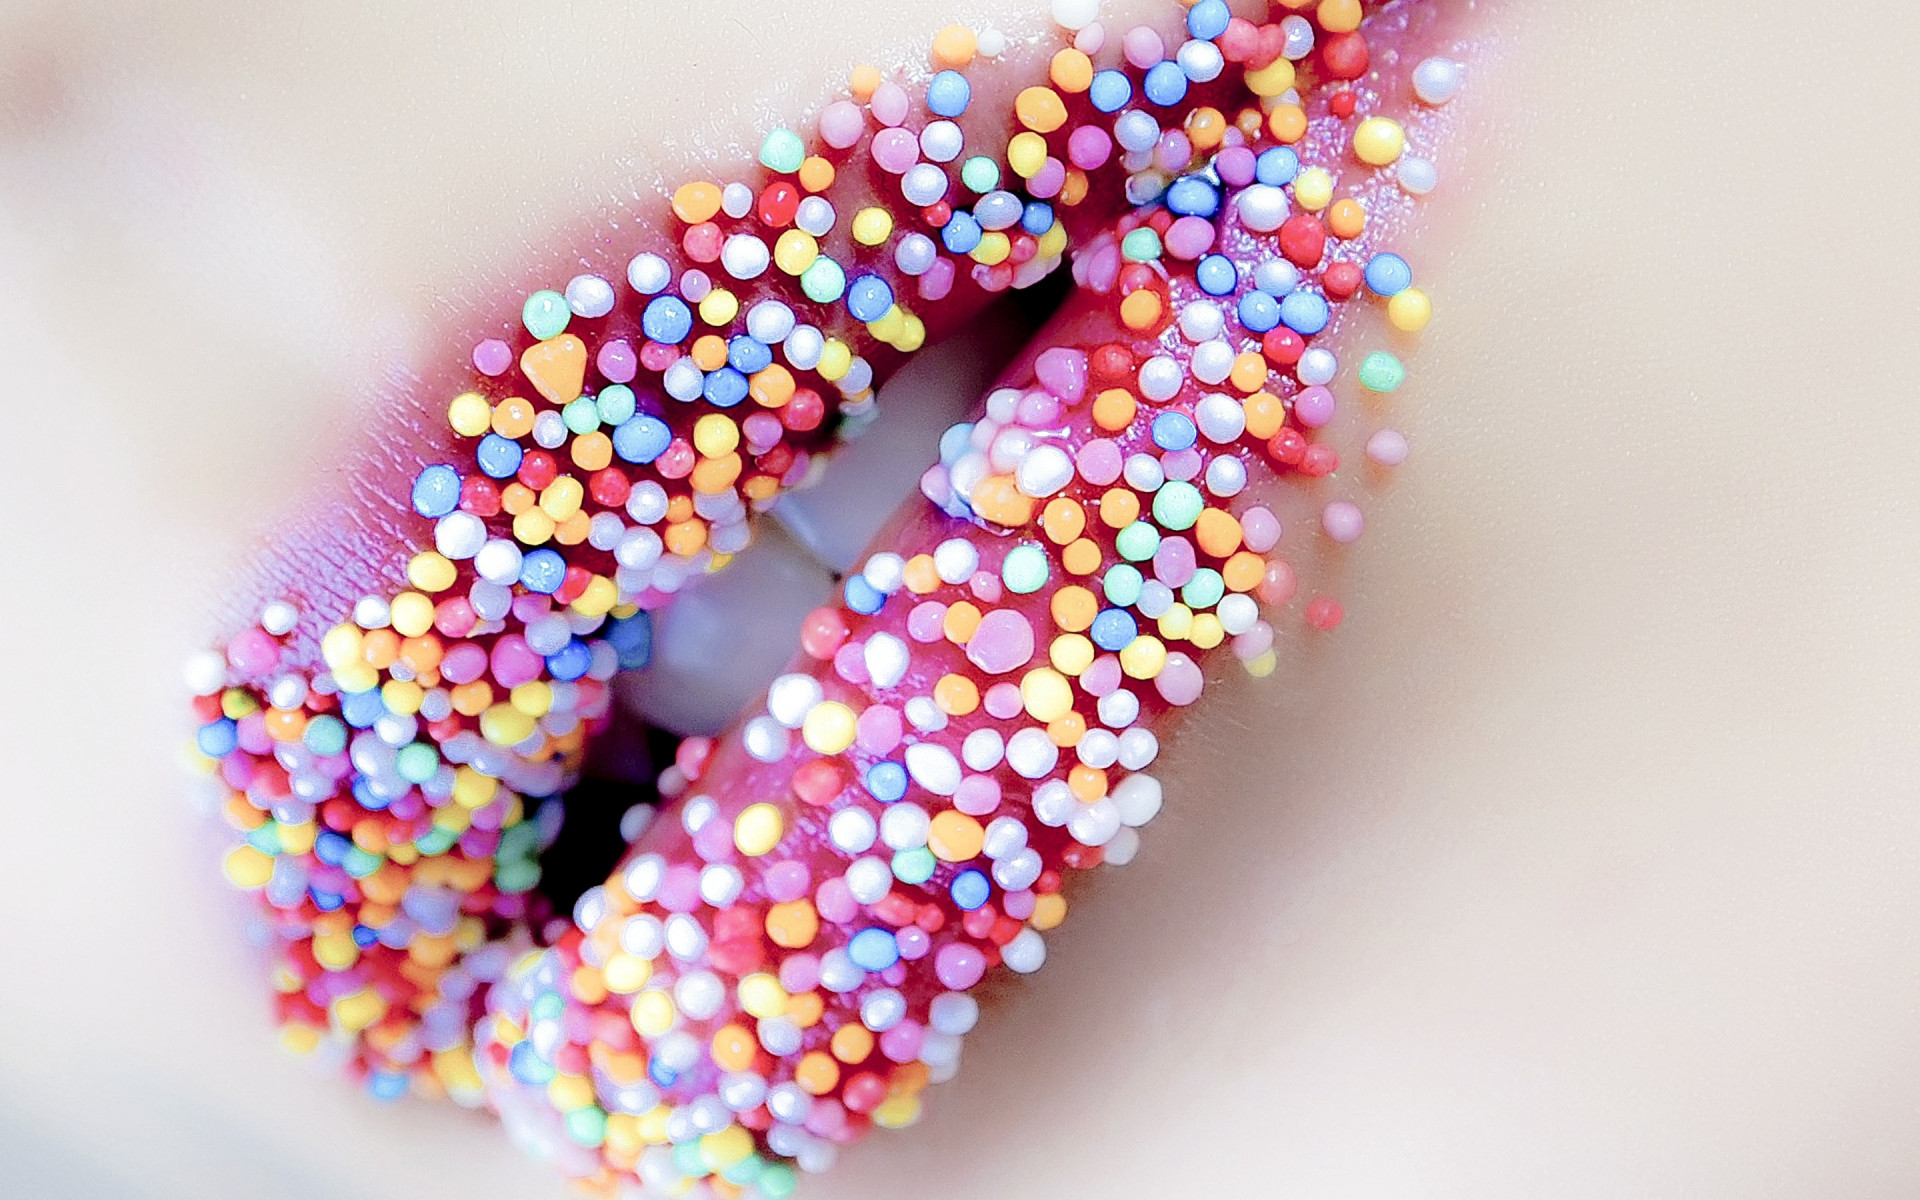 Lips with sweets wallpaper 1920x1200